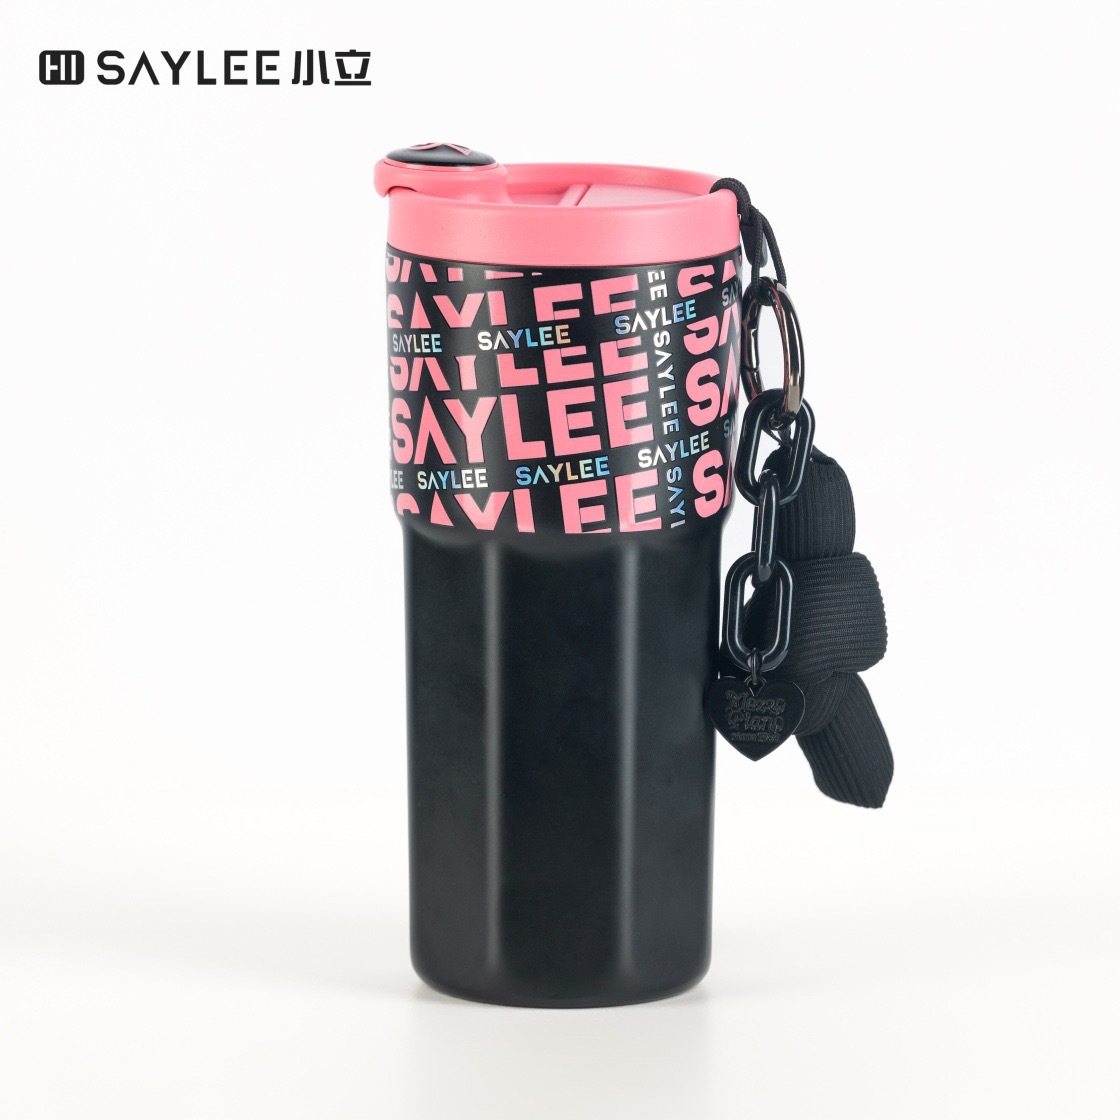 Hisaylee Xiaoli Sweet and Spicy Thermos Cup Straight Drink Cup Portable Hand Carrying Good-looking 316 Stainless Steel Cup Sports